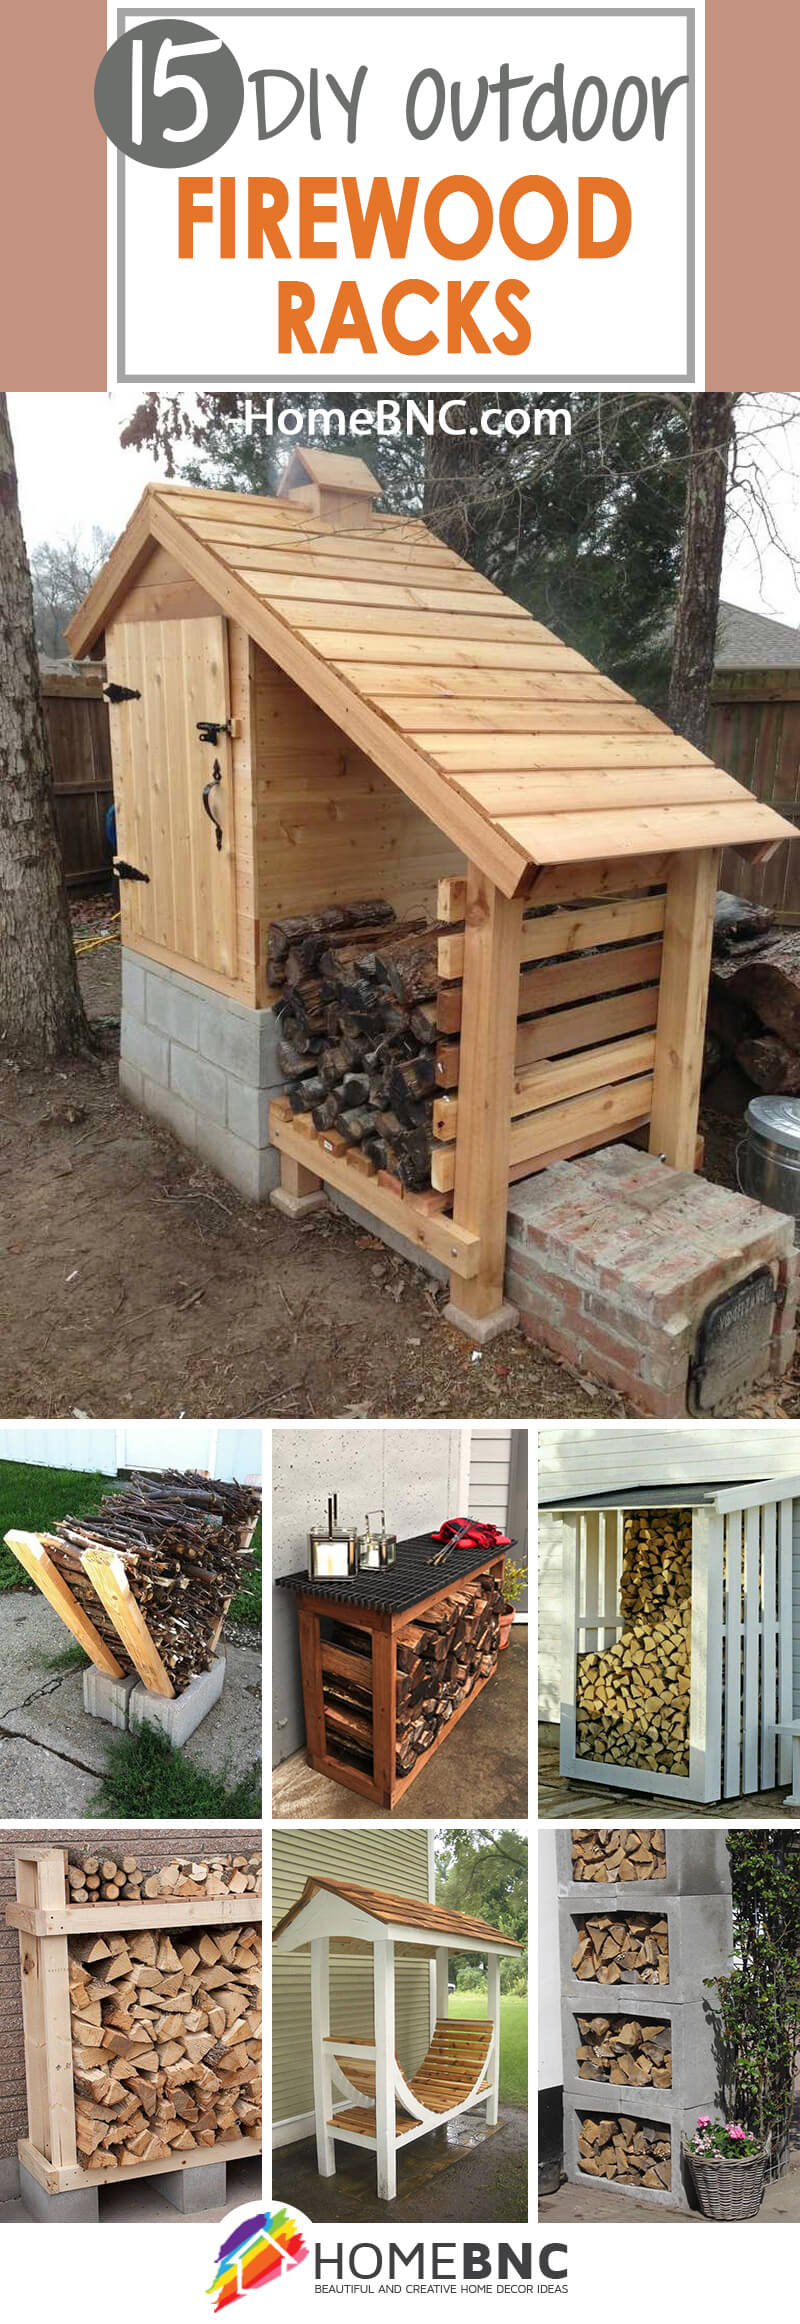 DIY Outdoor Firewood Rack Projects